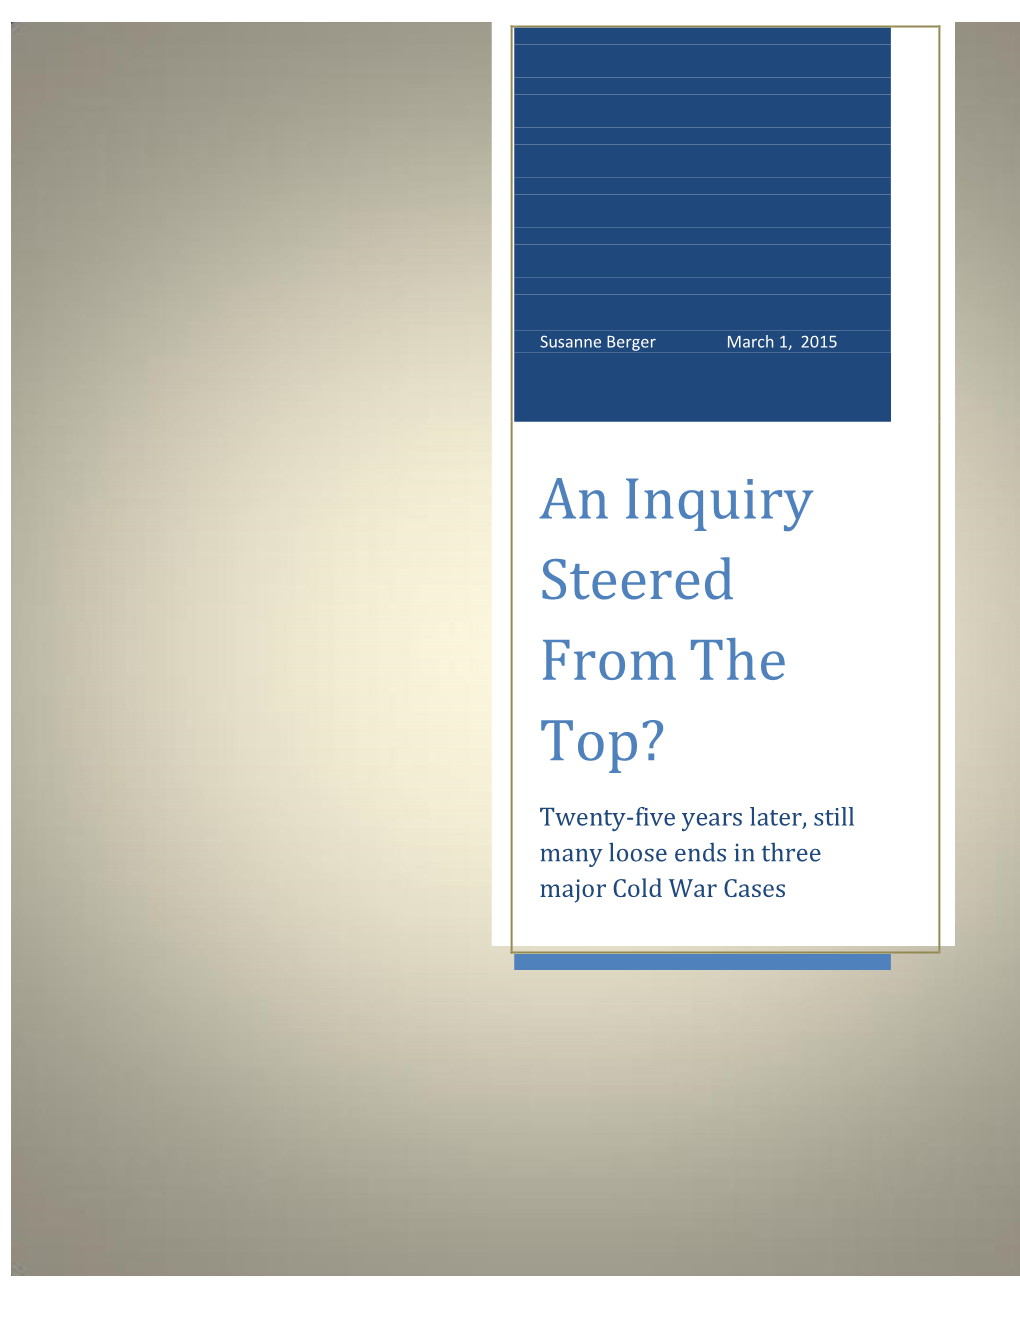 An Inquiry Steered from the Top?